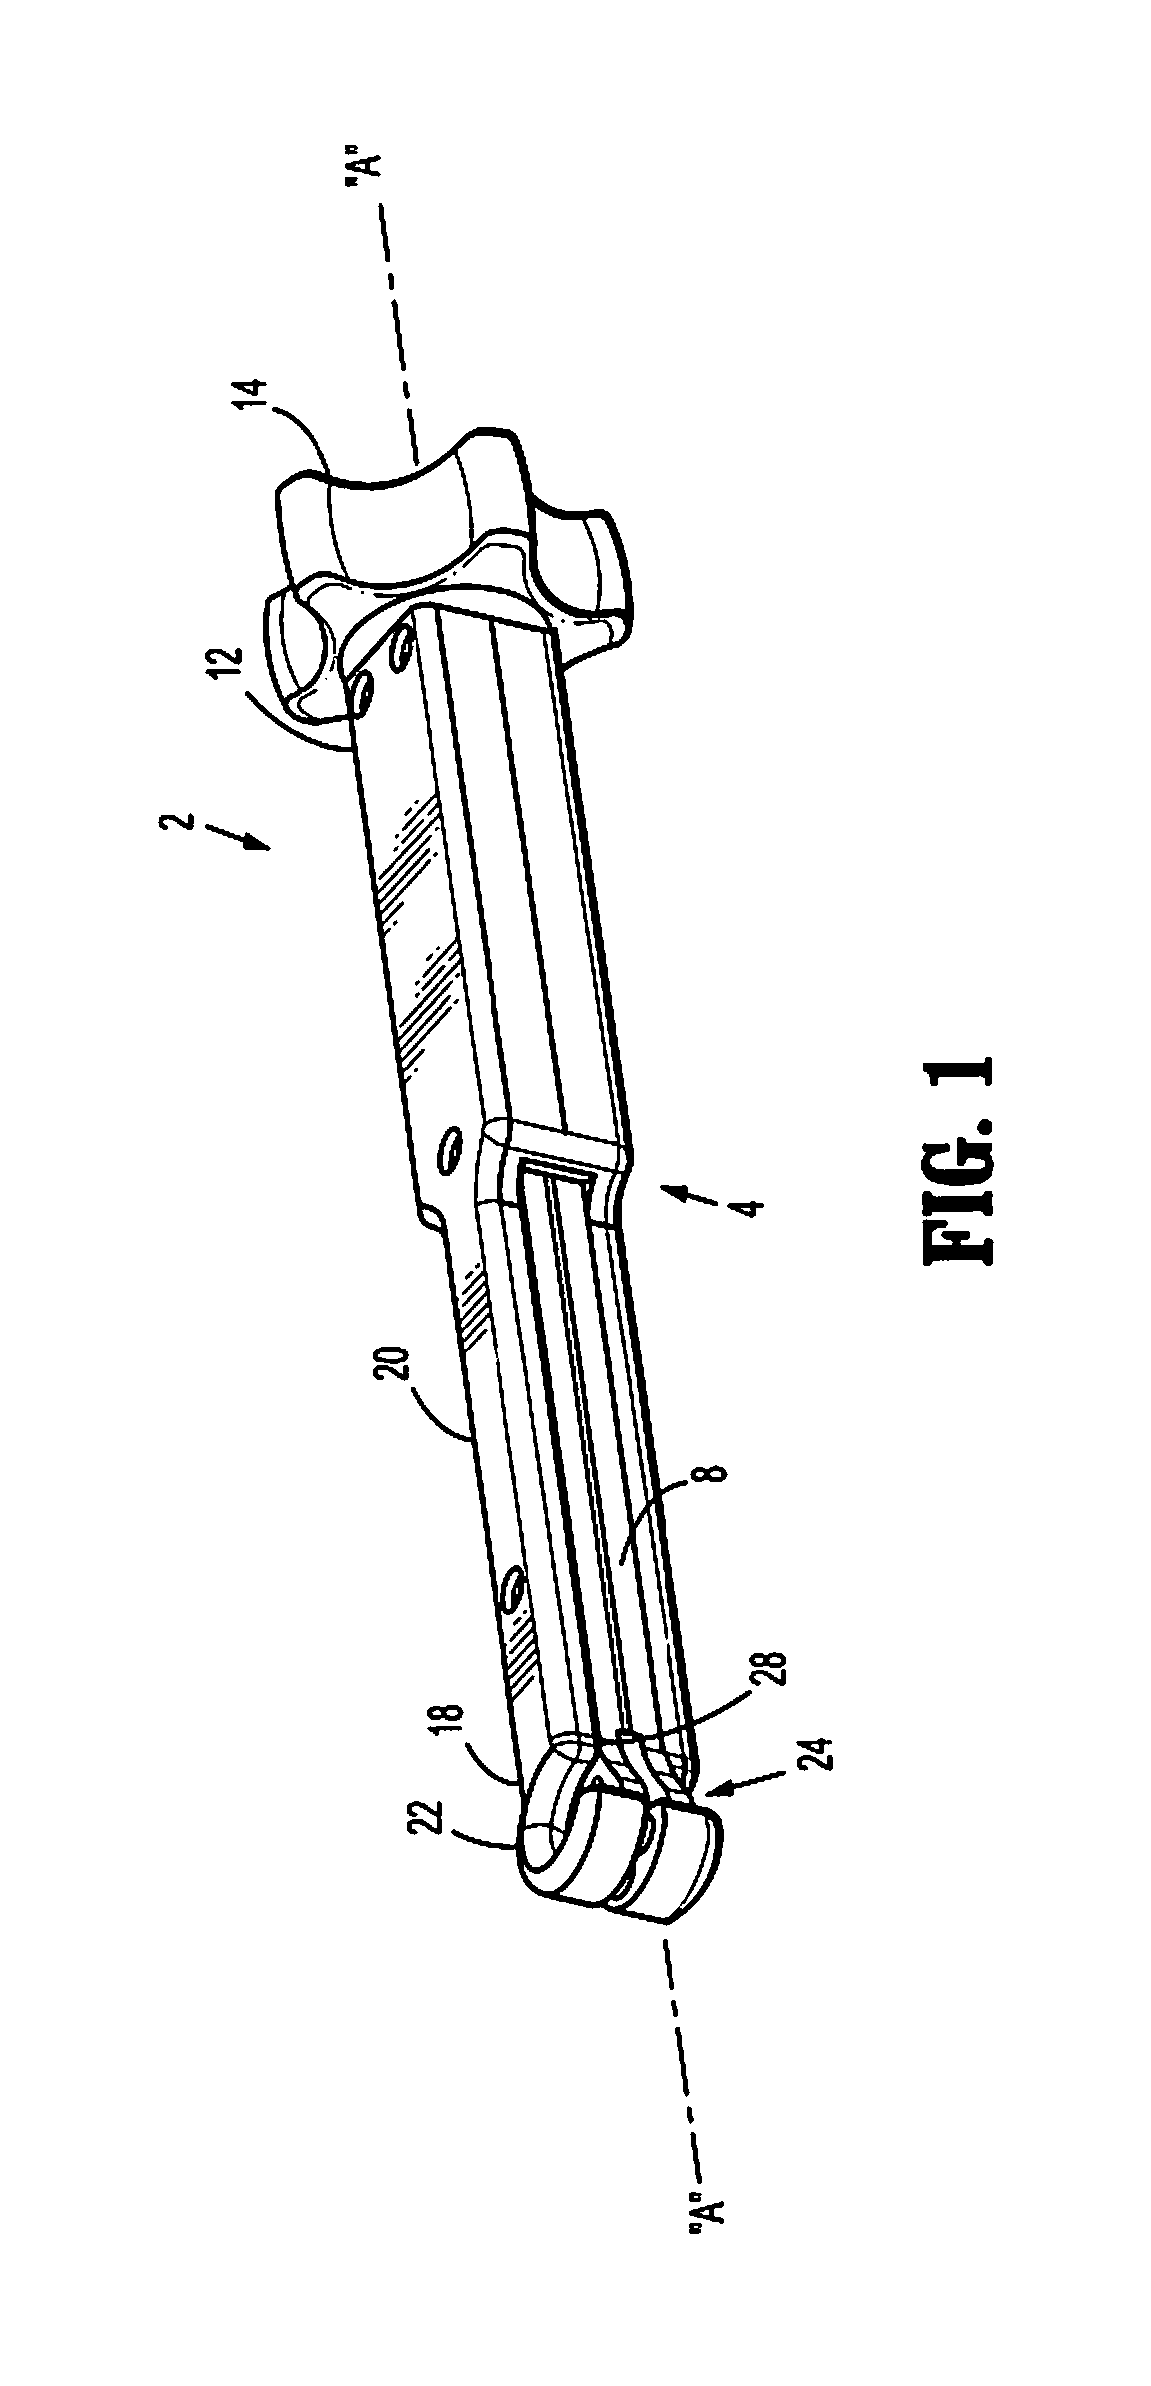 Surgical rod scorer and method of use of the same